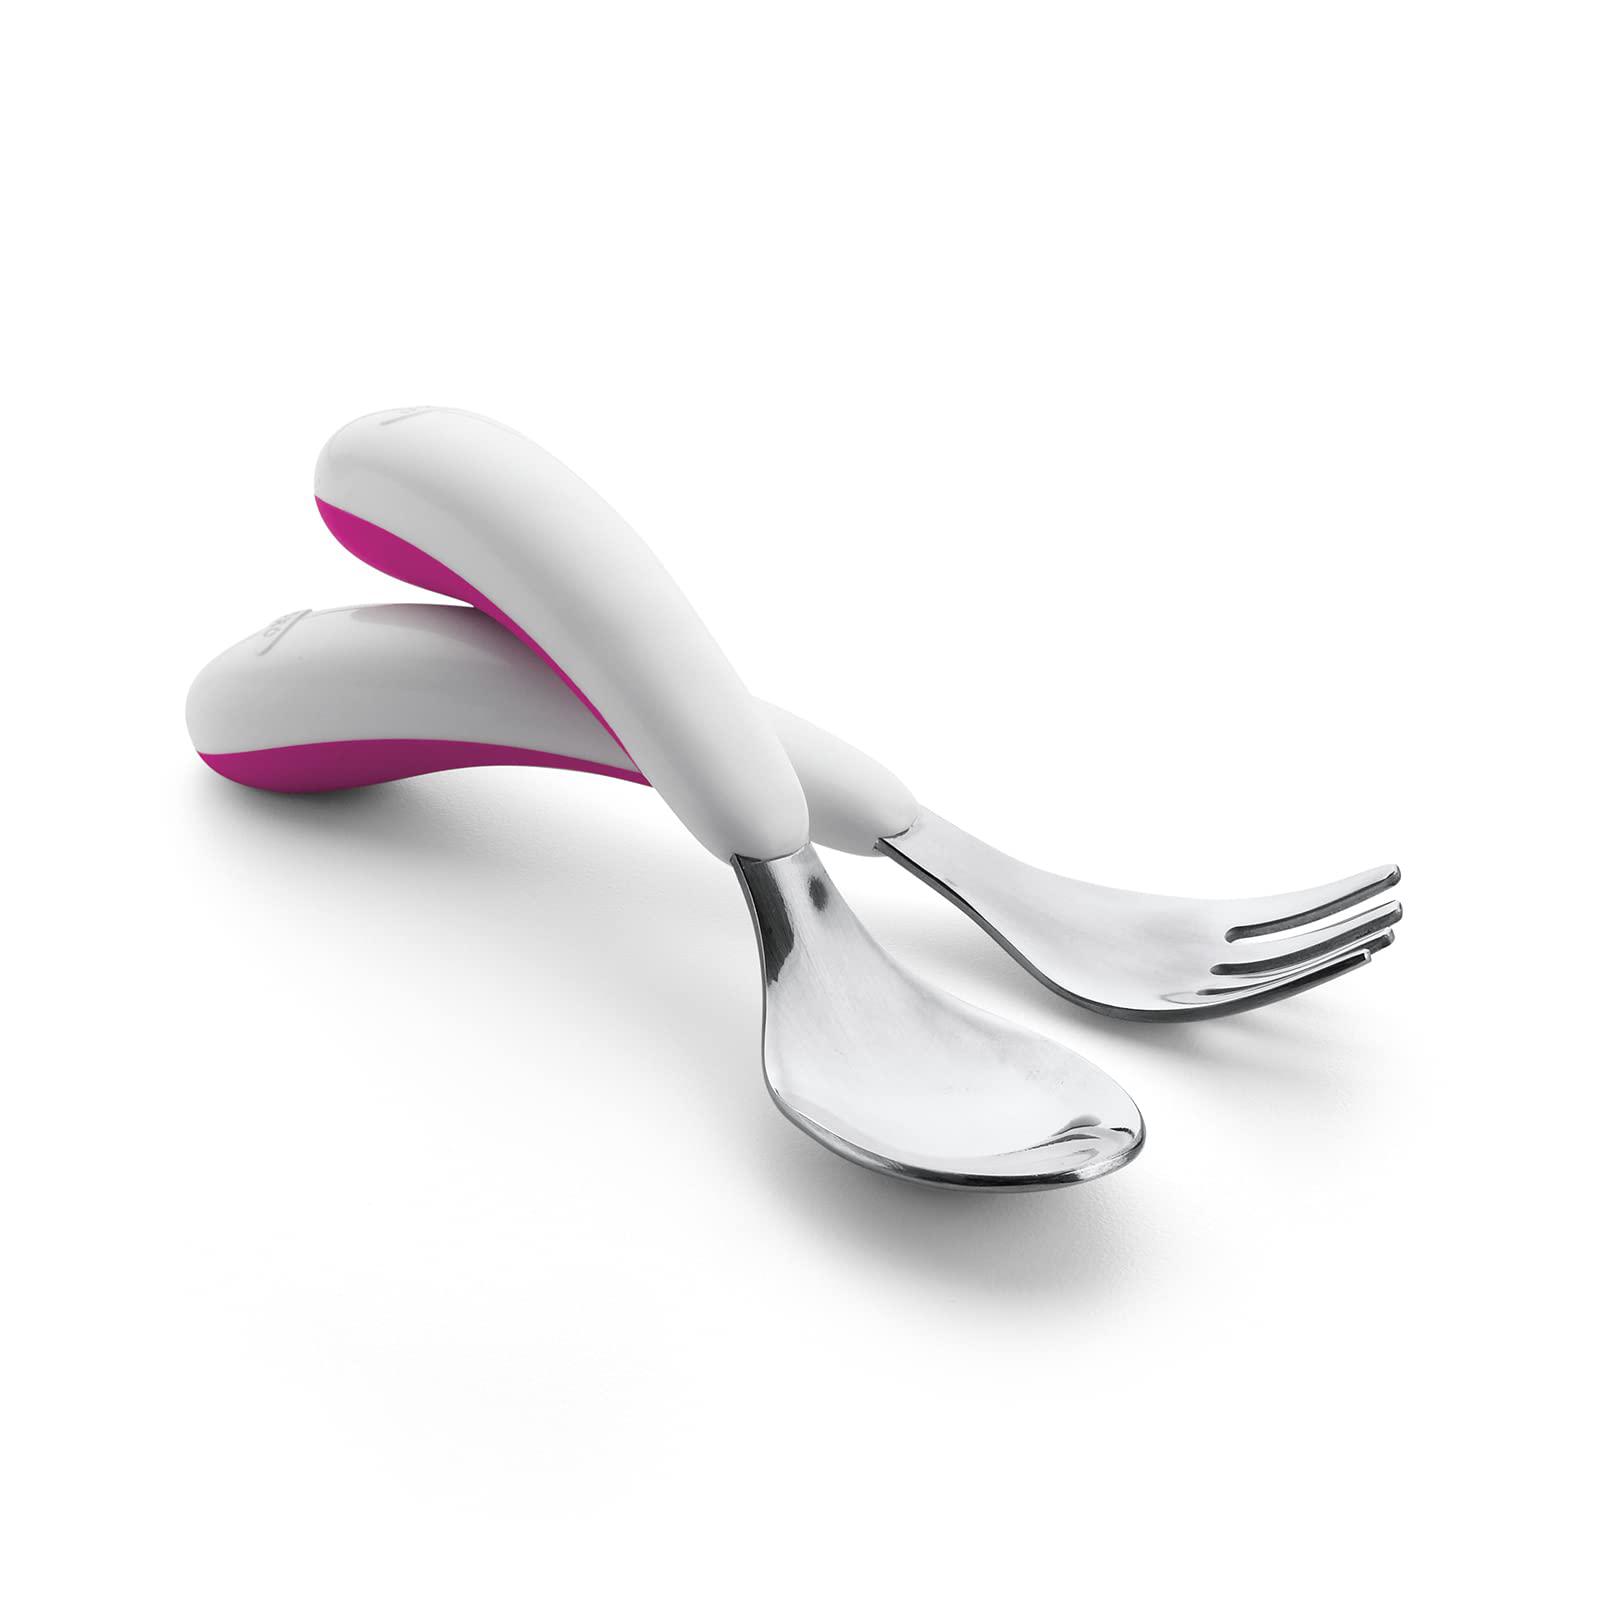 oxo tot fork & spoon set- pink